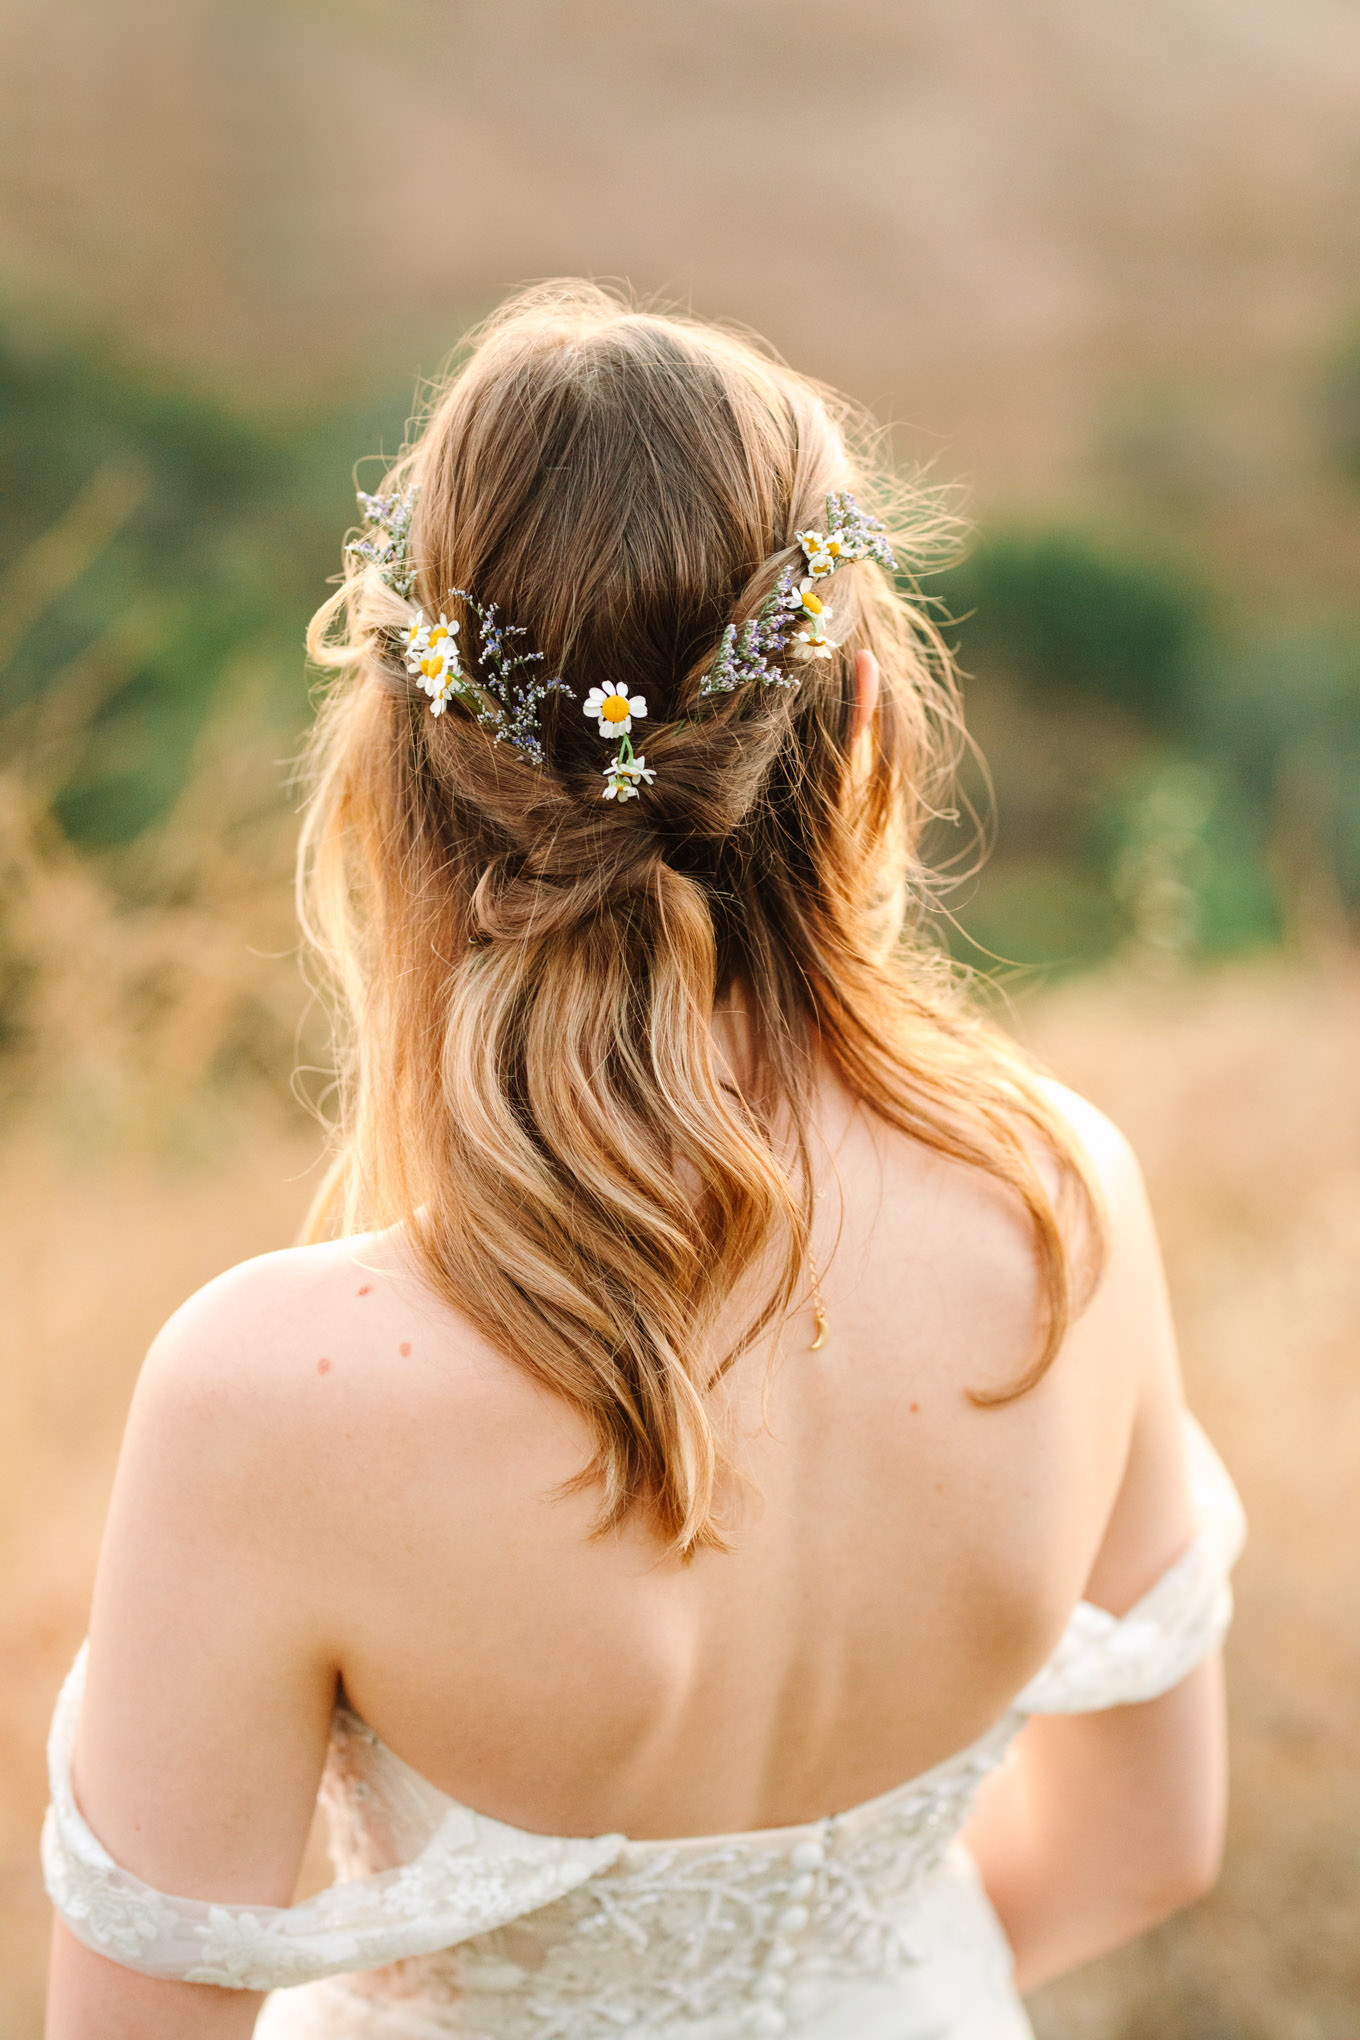 Bridal hair half updo with flowers | Engagement, elopement, and wedding photography roundup of Mary Costa’s favorite images from 2020 | Colorful and elevated photography for fun-loving couples in Southern California | #2020wedding #elopement #weddingphoto #weddingphotography #microwedding   Source: Mary Costa Photography | Los Angeles